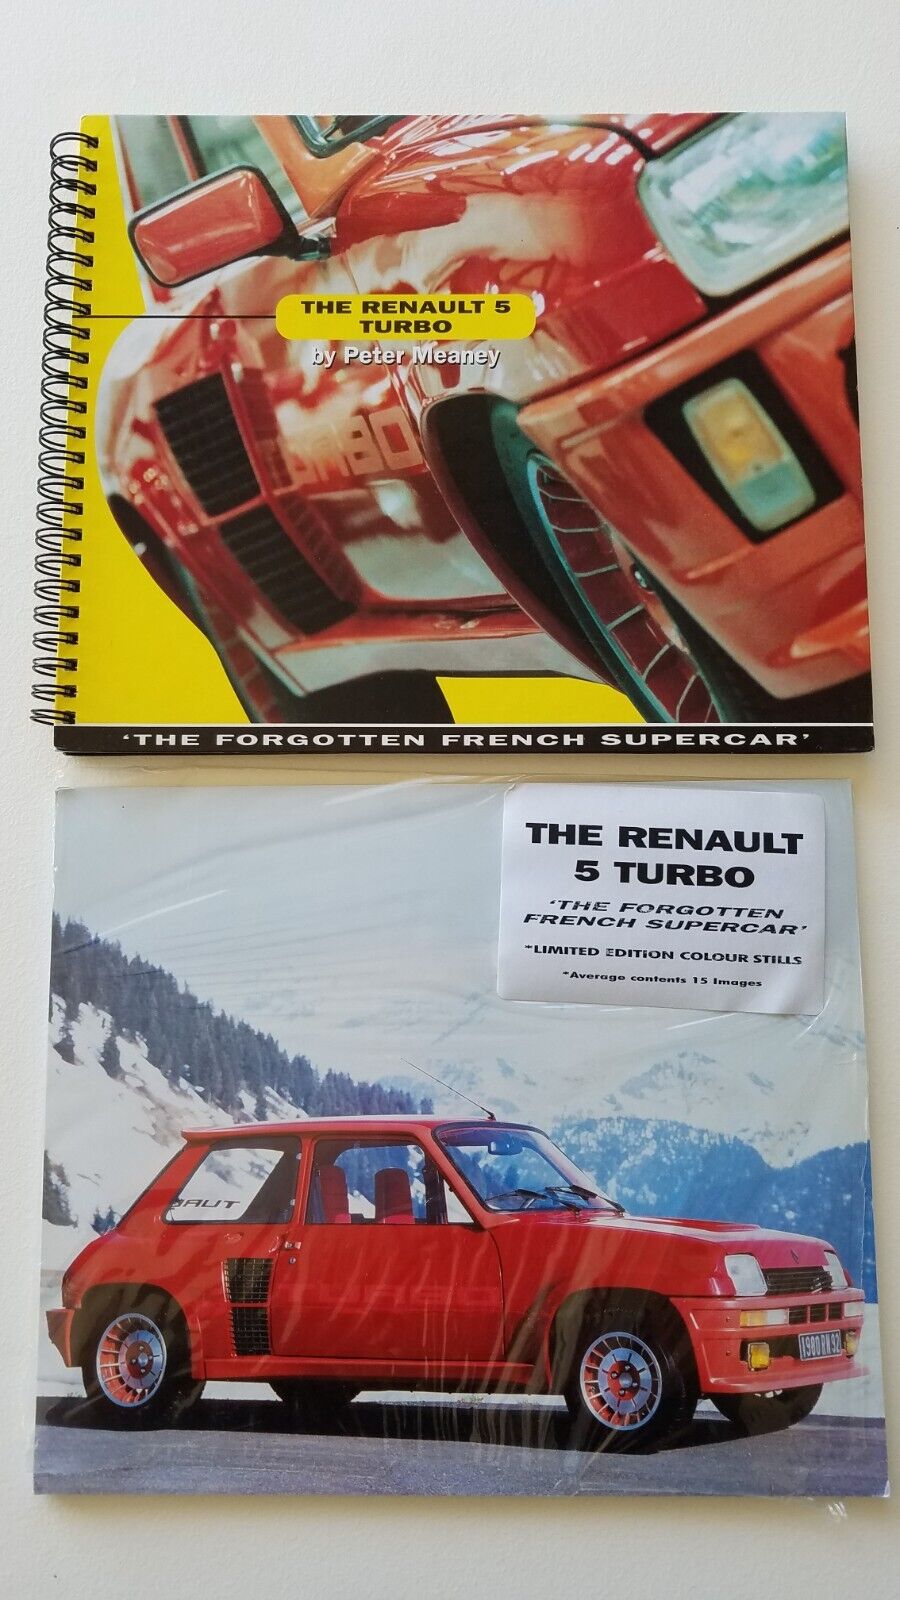 Renault The Forgotten French Super Car LE Book #310 & Color Stills *Peter Meaney